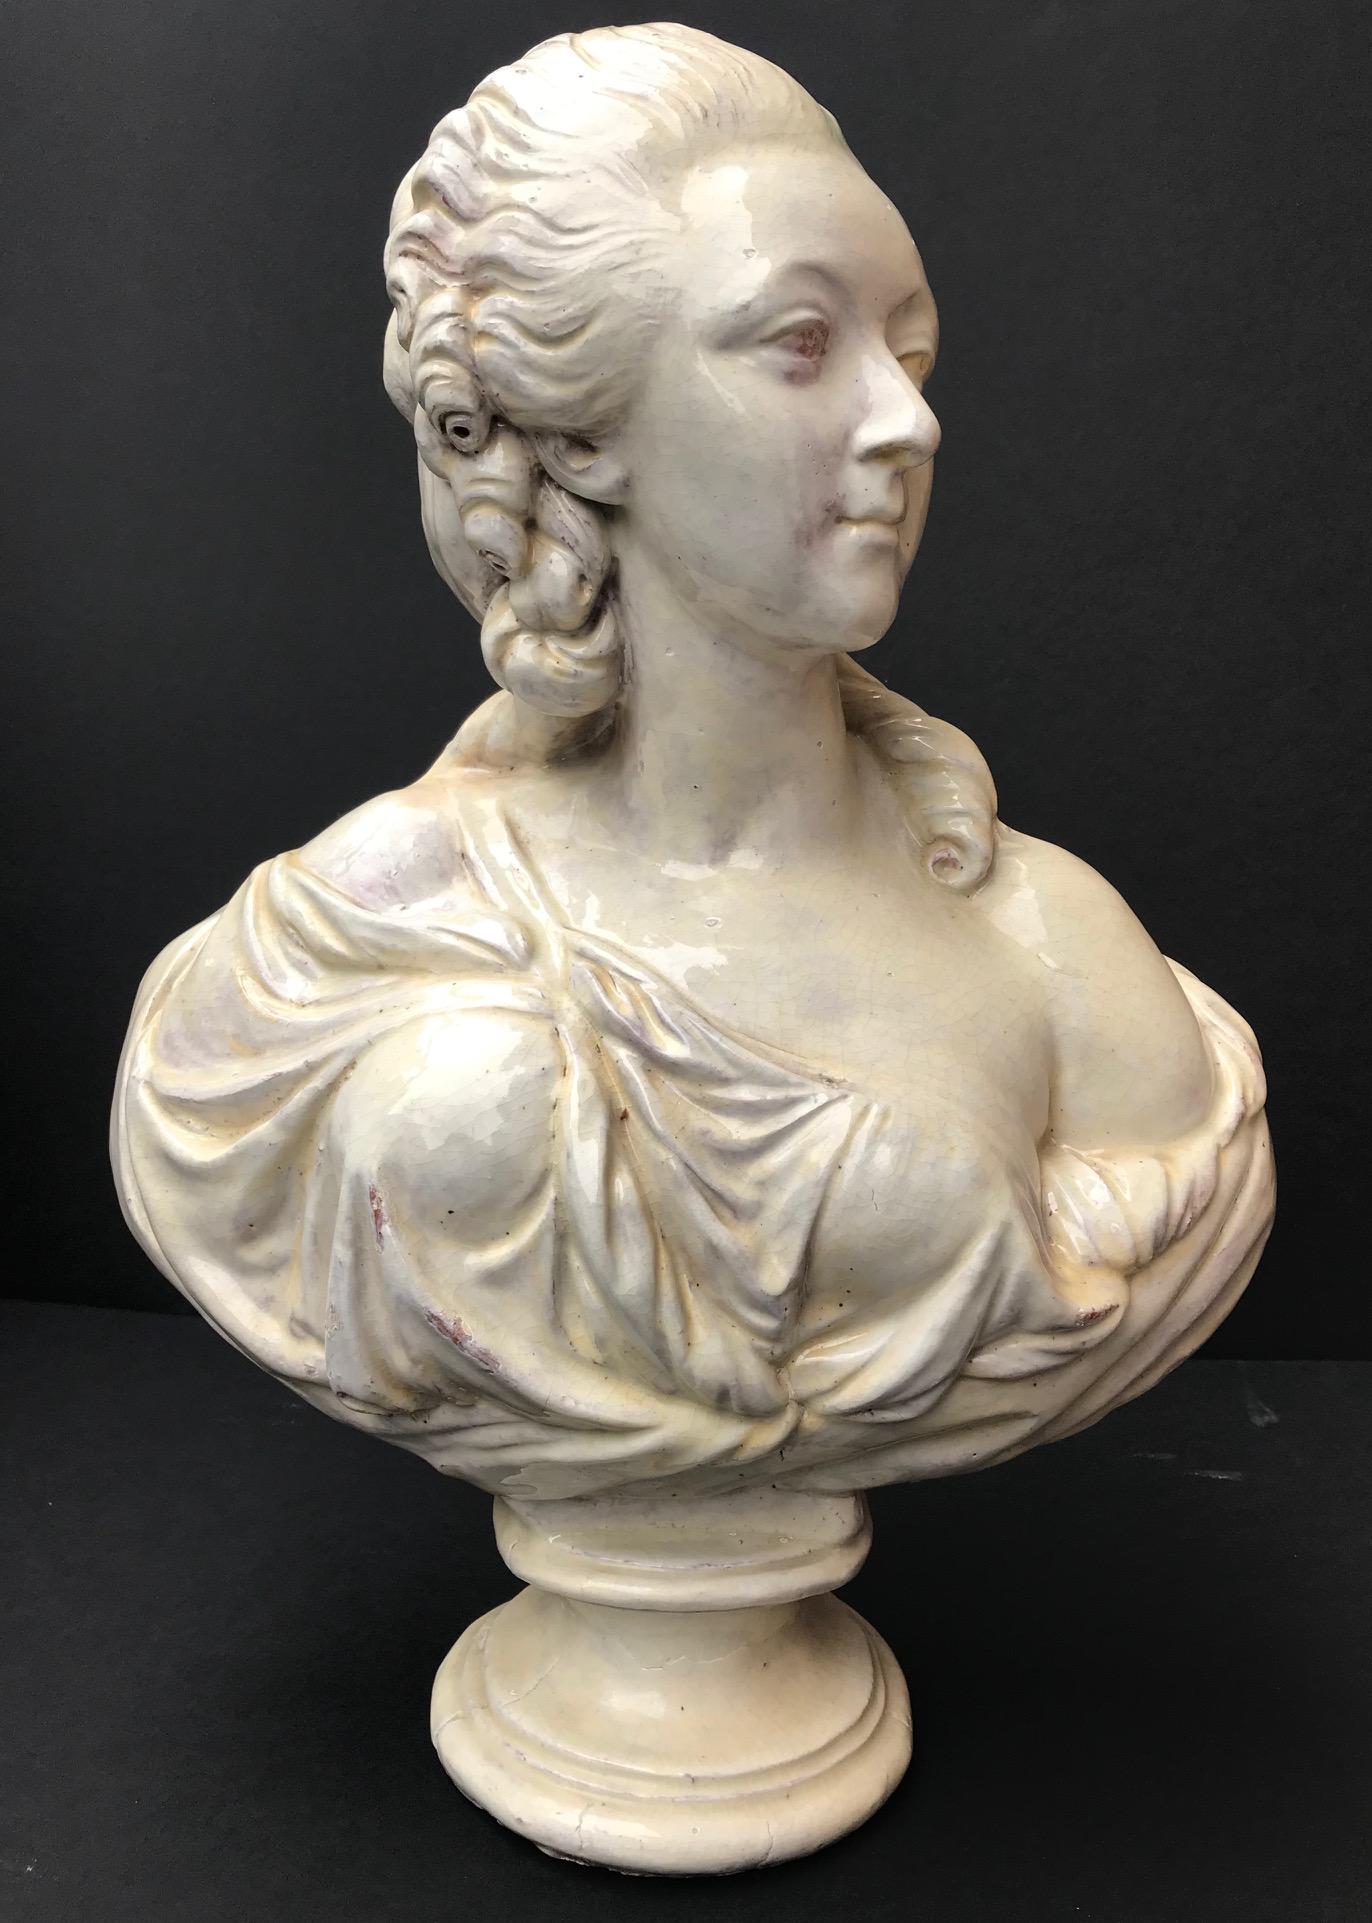 This large bust, depicting the Countess du Barry, was made after the 18th century original by Augustin Pajou. It is in the Louvre collection. He was the premier sculptor to King Louis XV of France. The celebrated sculptor rendered du Barry’s